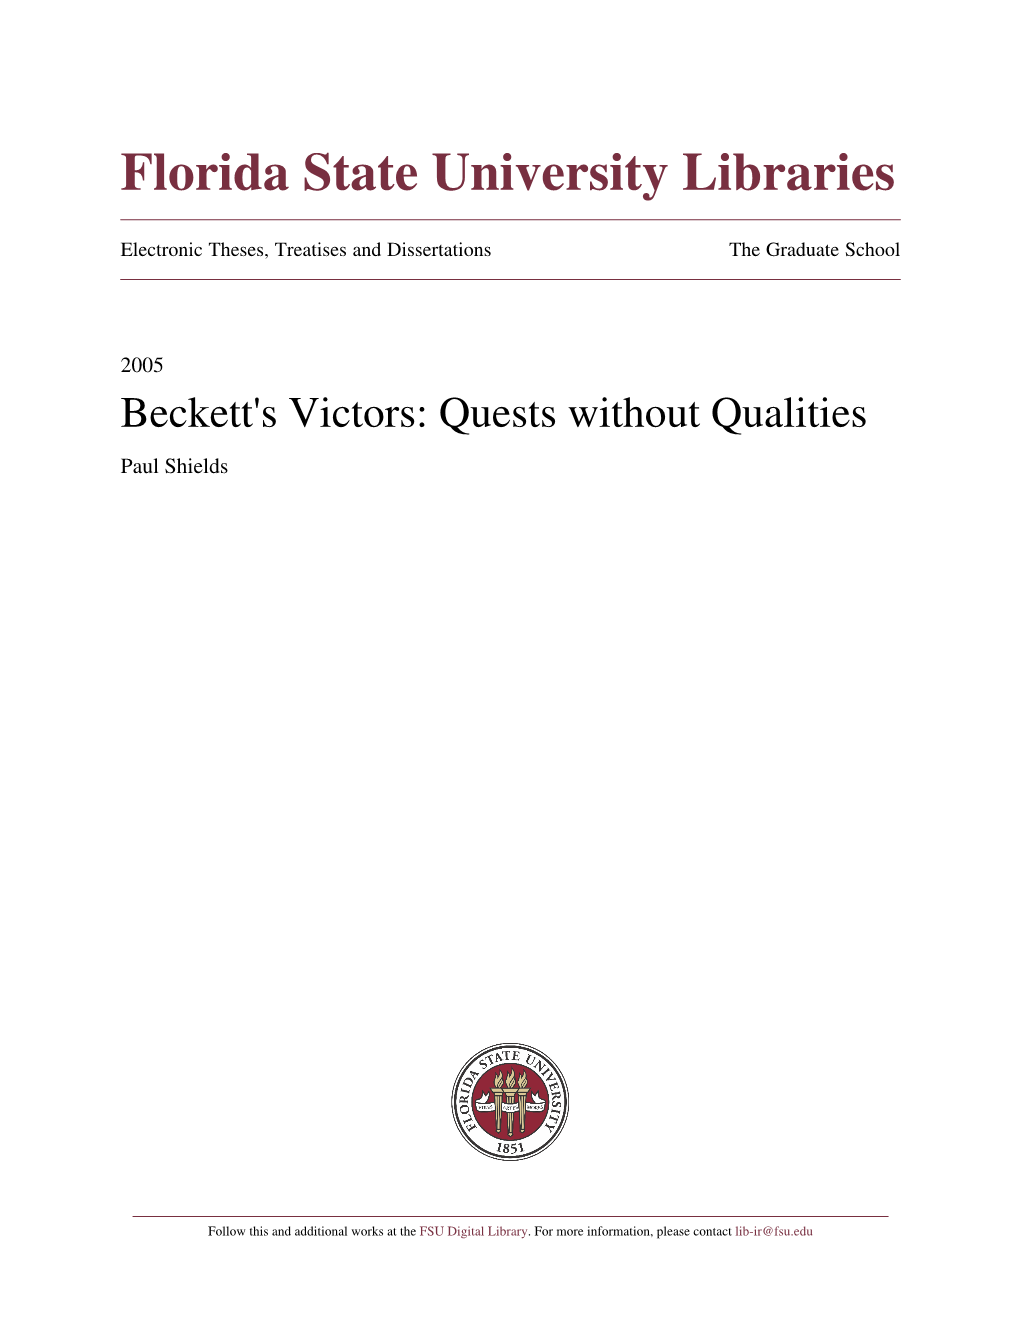 Beckett's Victors: Quests Without Qualities Paul Shields